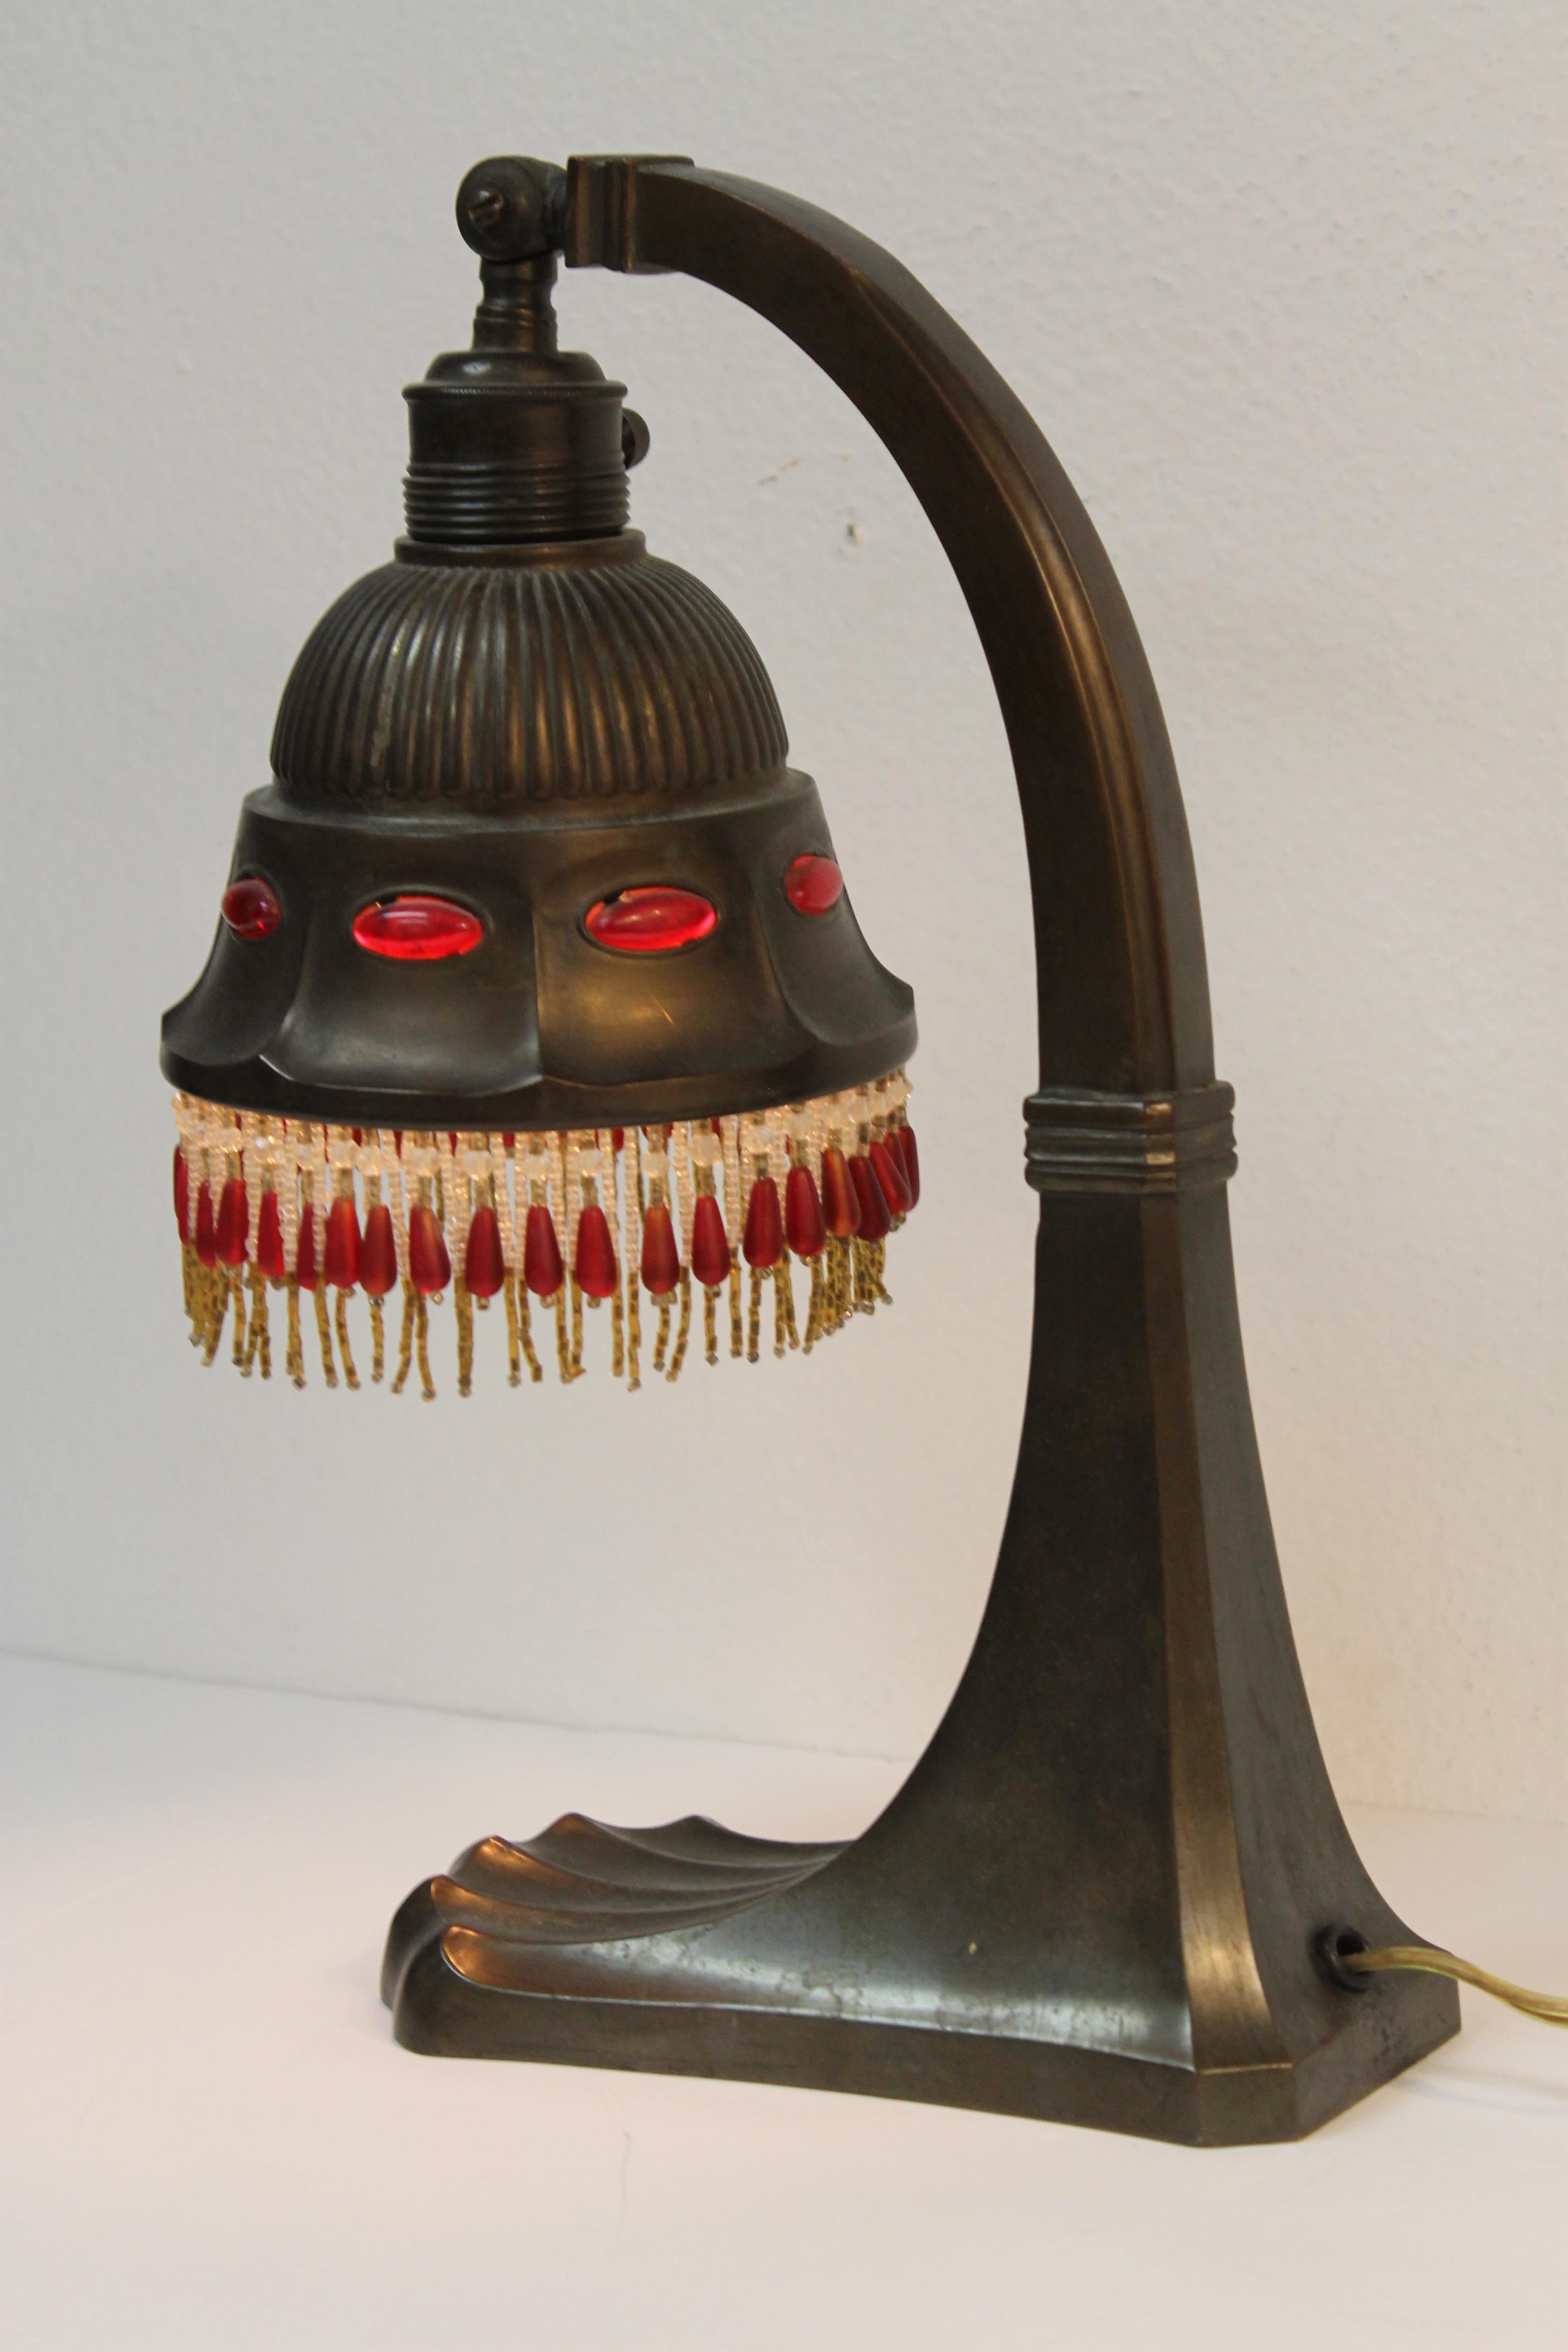 An early 20th century small accent light, brass with red glass lozenge shaped jewels set into the shade. Glass beaded fringe. Lamp measures 12.5